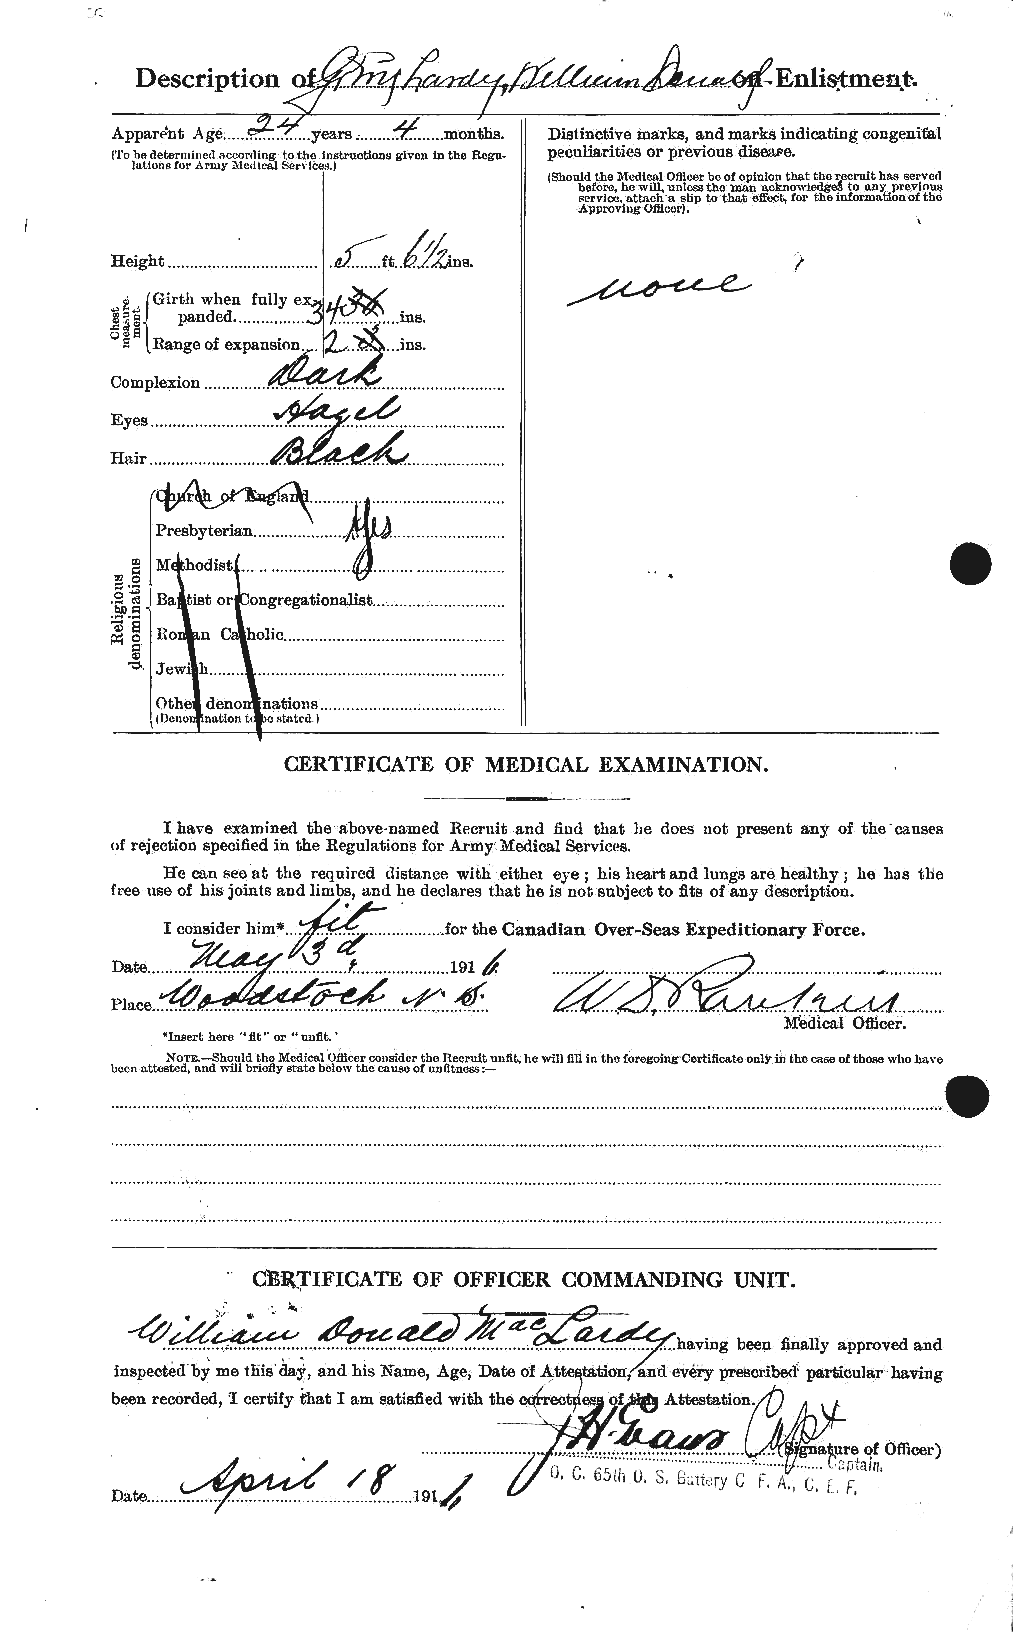 Personnel Records of the First World War - CEF 534028b